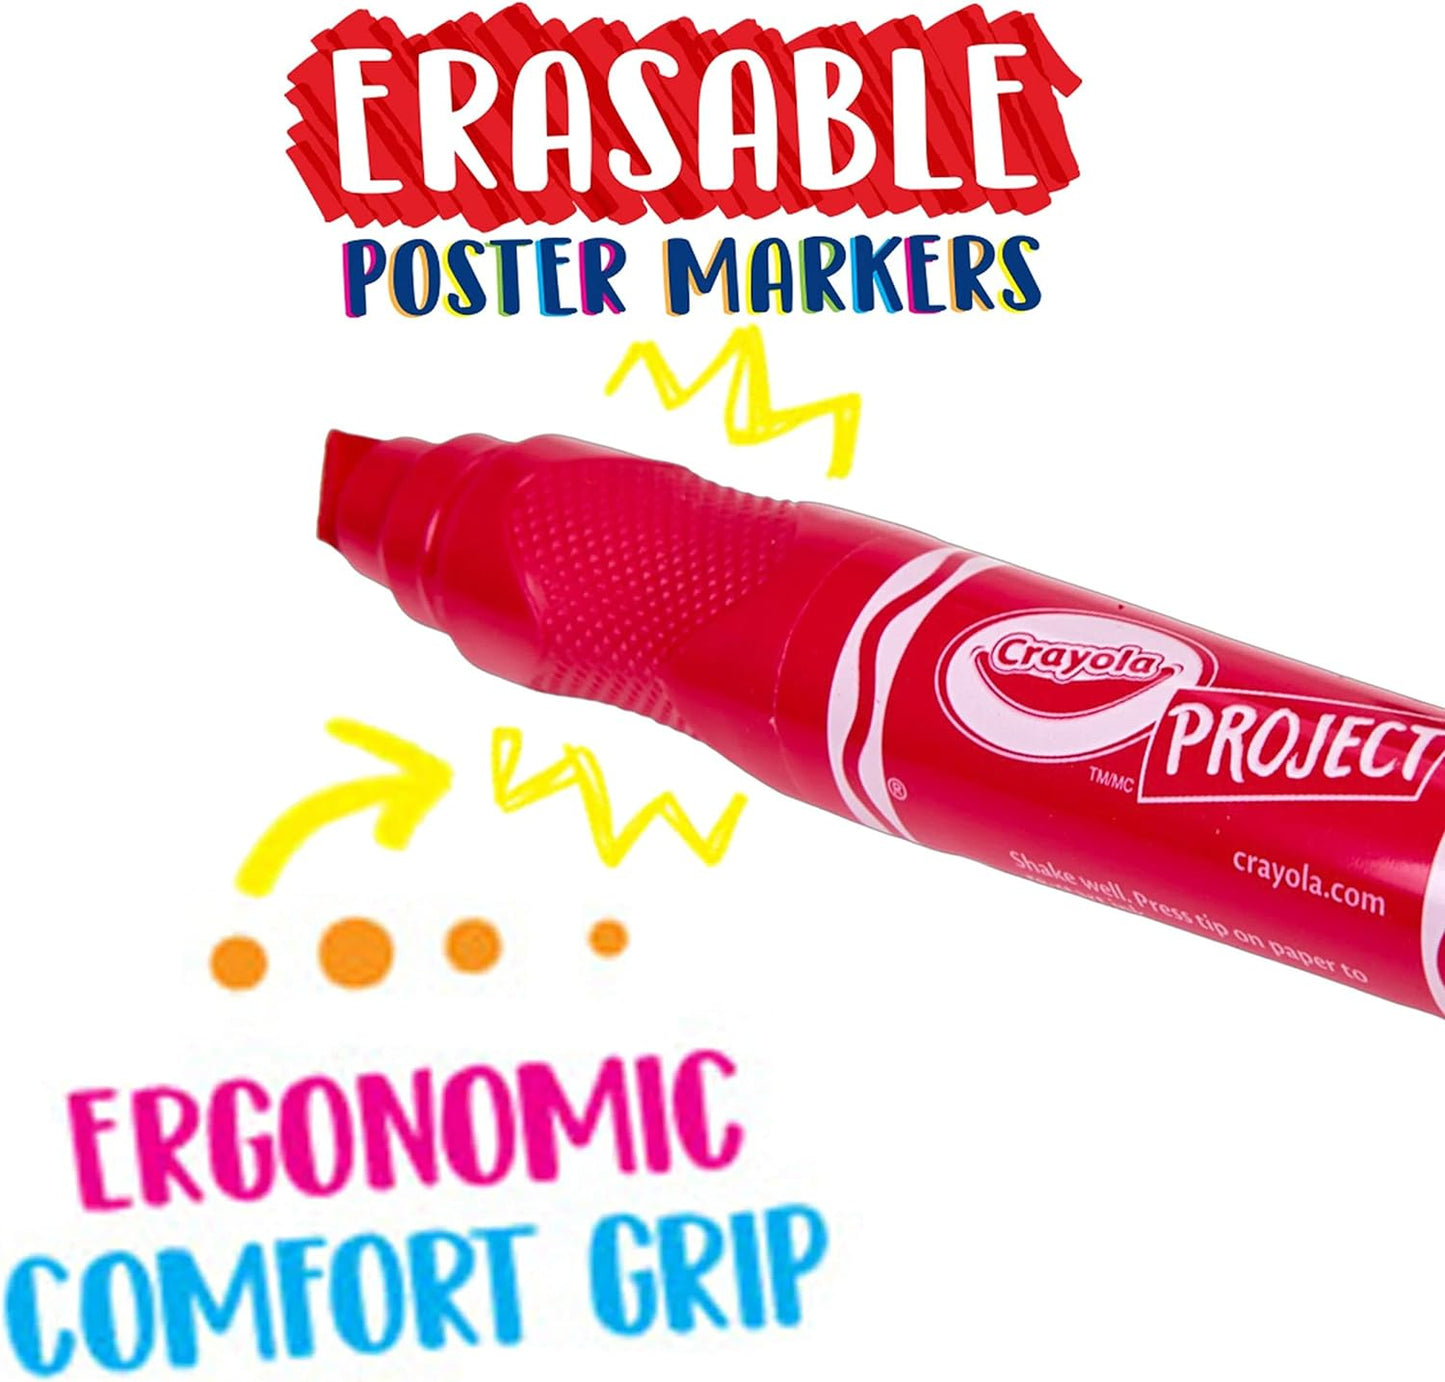 Crayola Project Erasable Poster Markers - Pack of 6